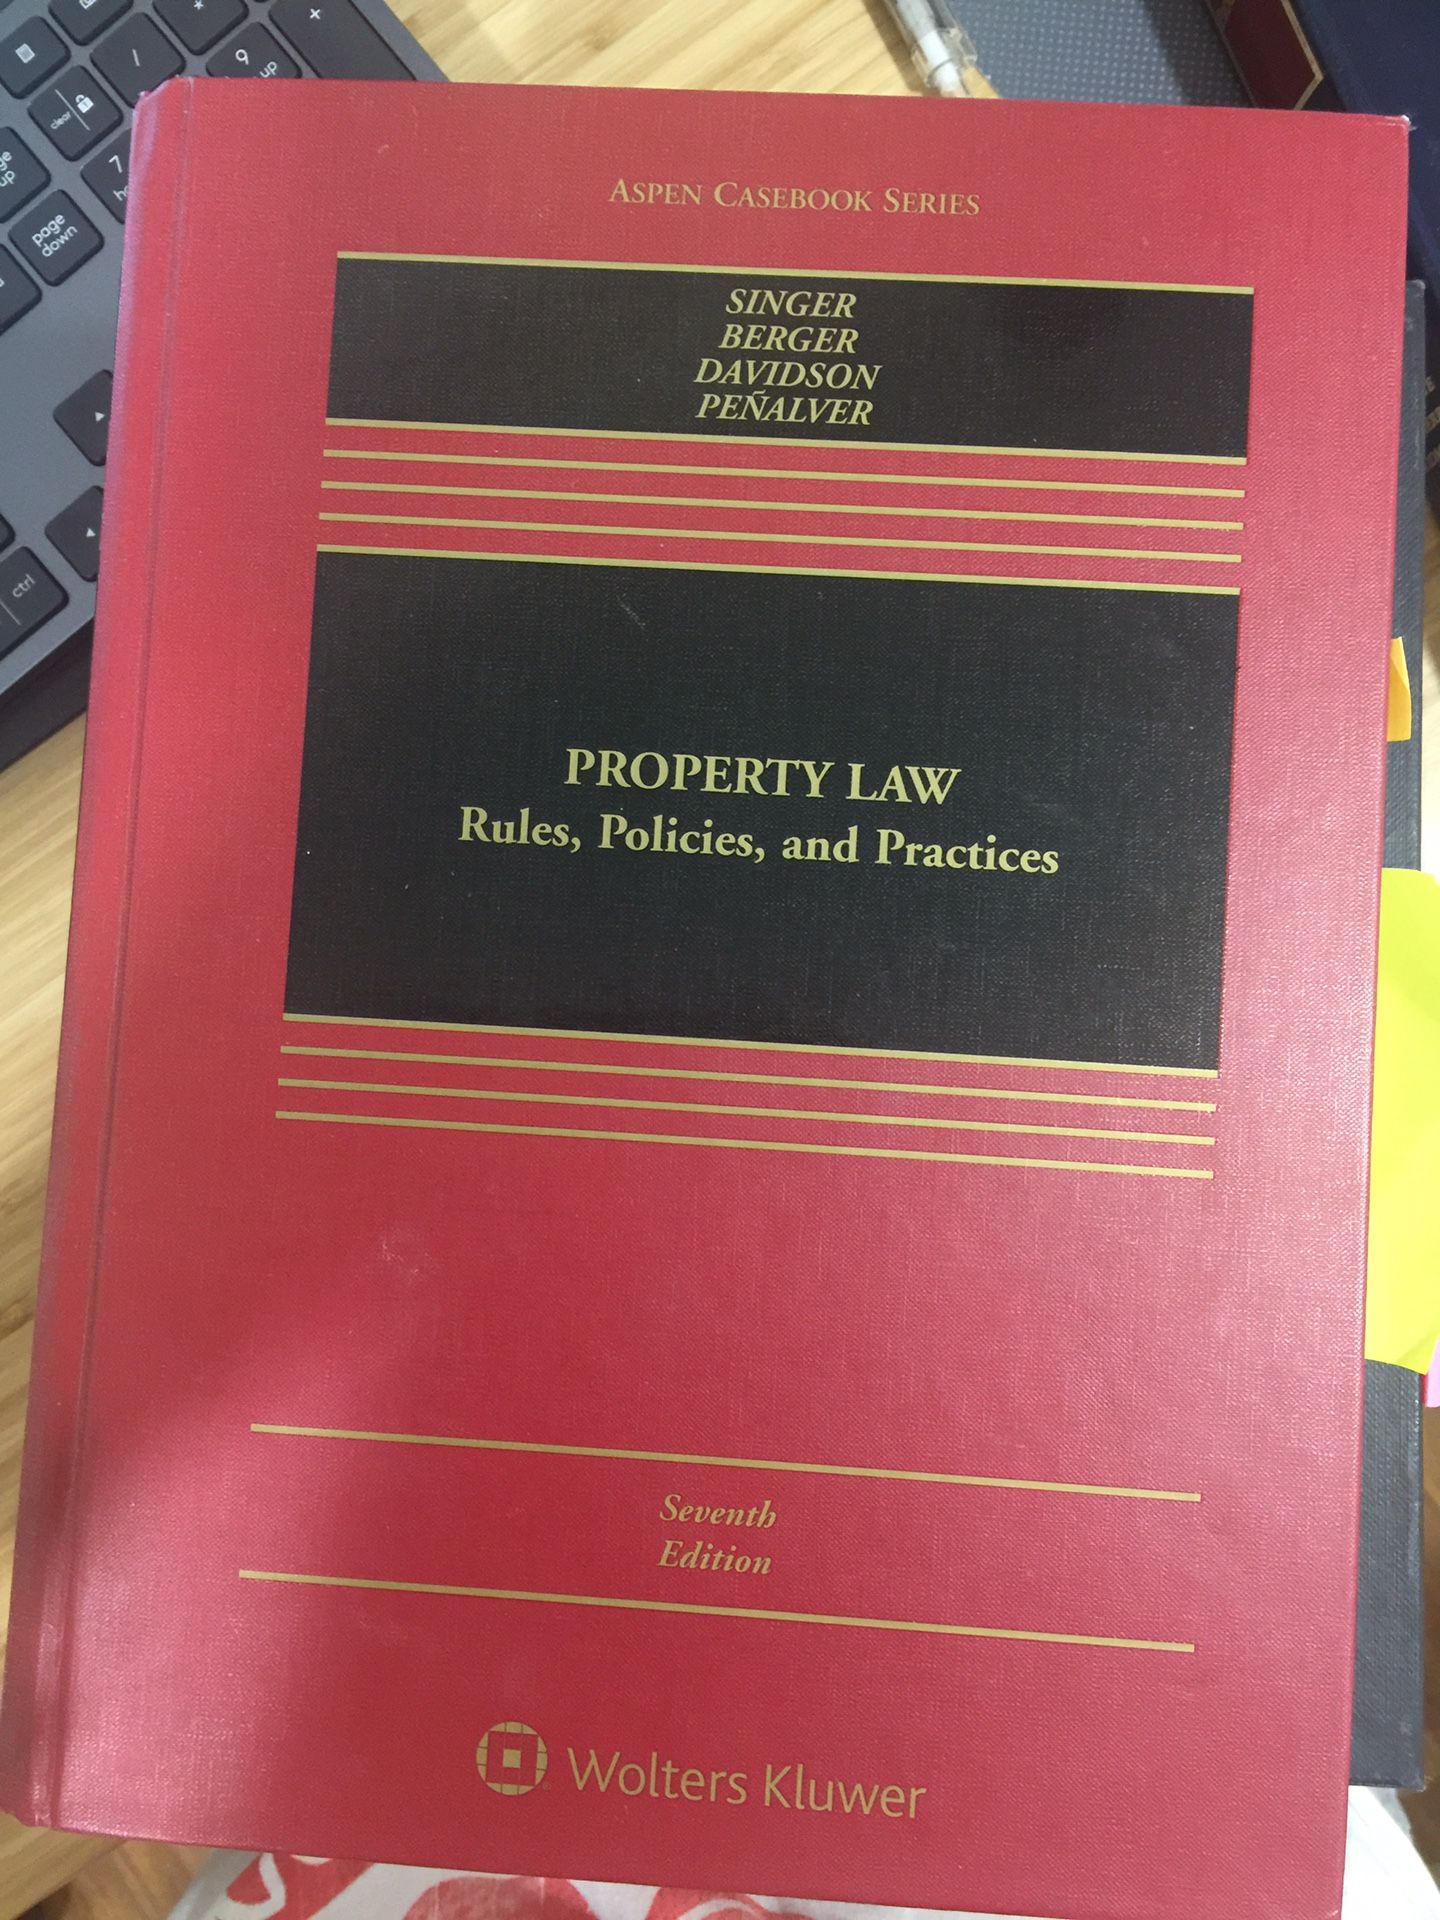 Property Law, Rules, Policies, and, Practices, 7th edition, Singer, Berger, Davidson, Penalver